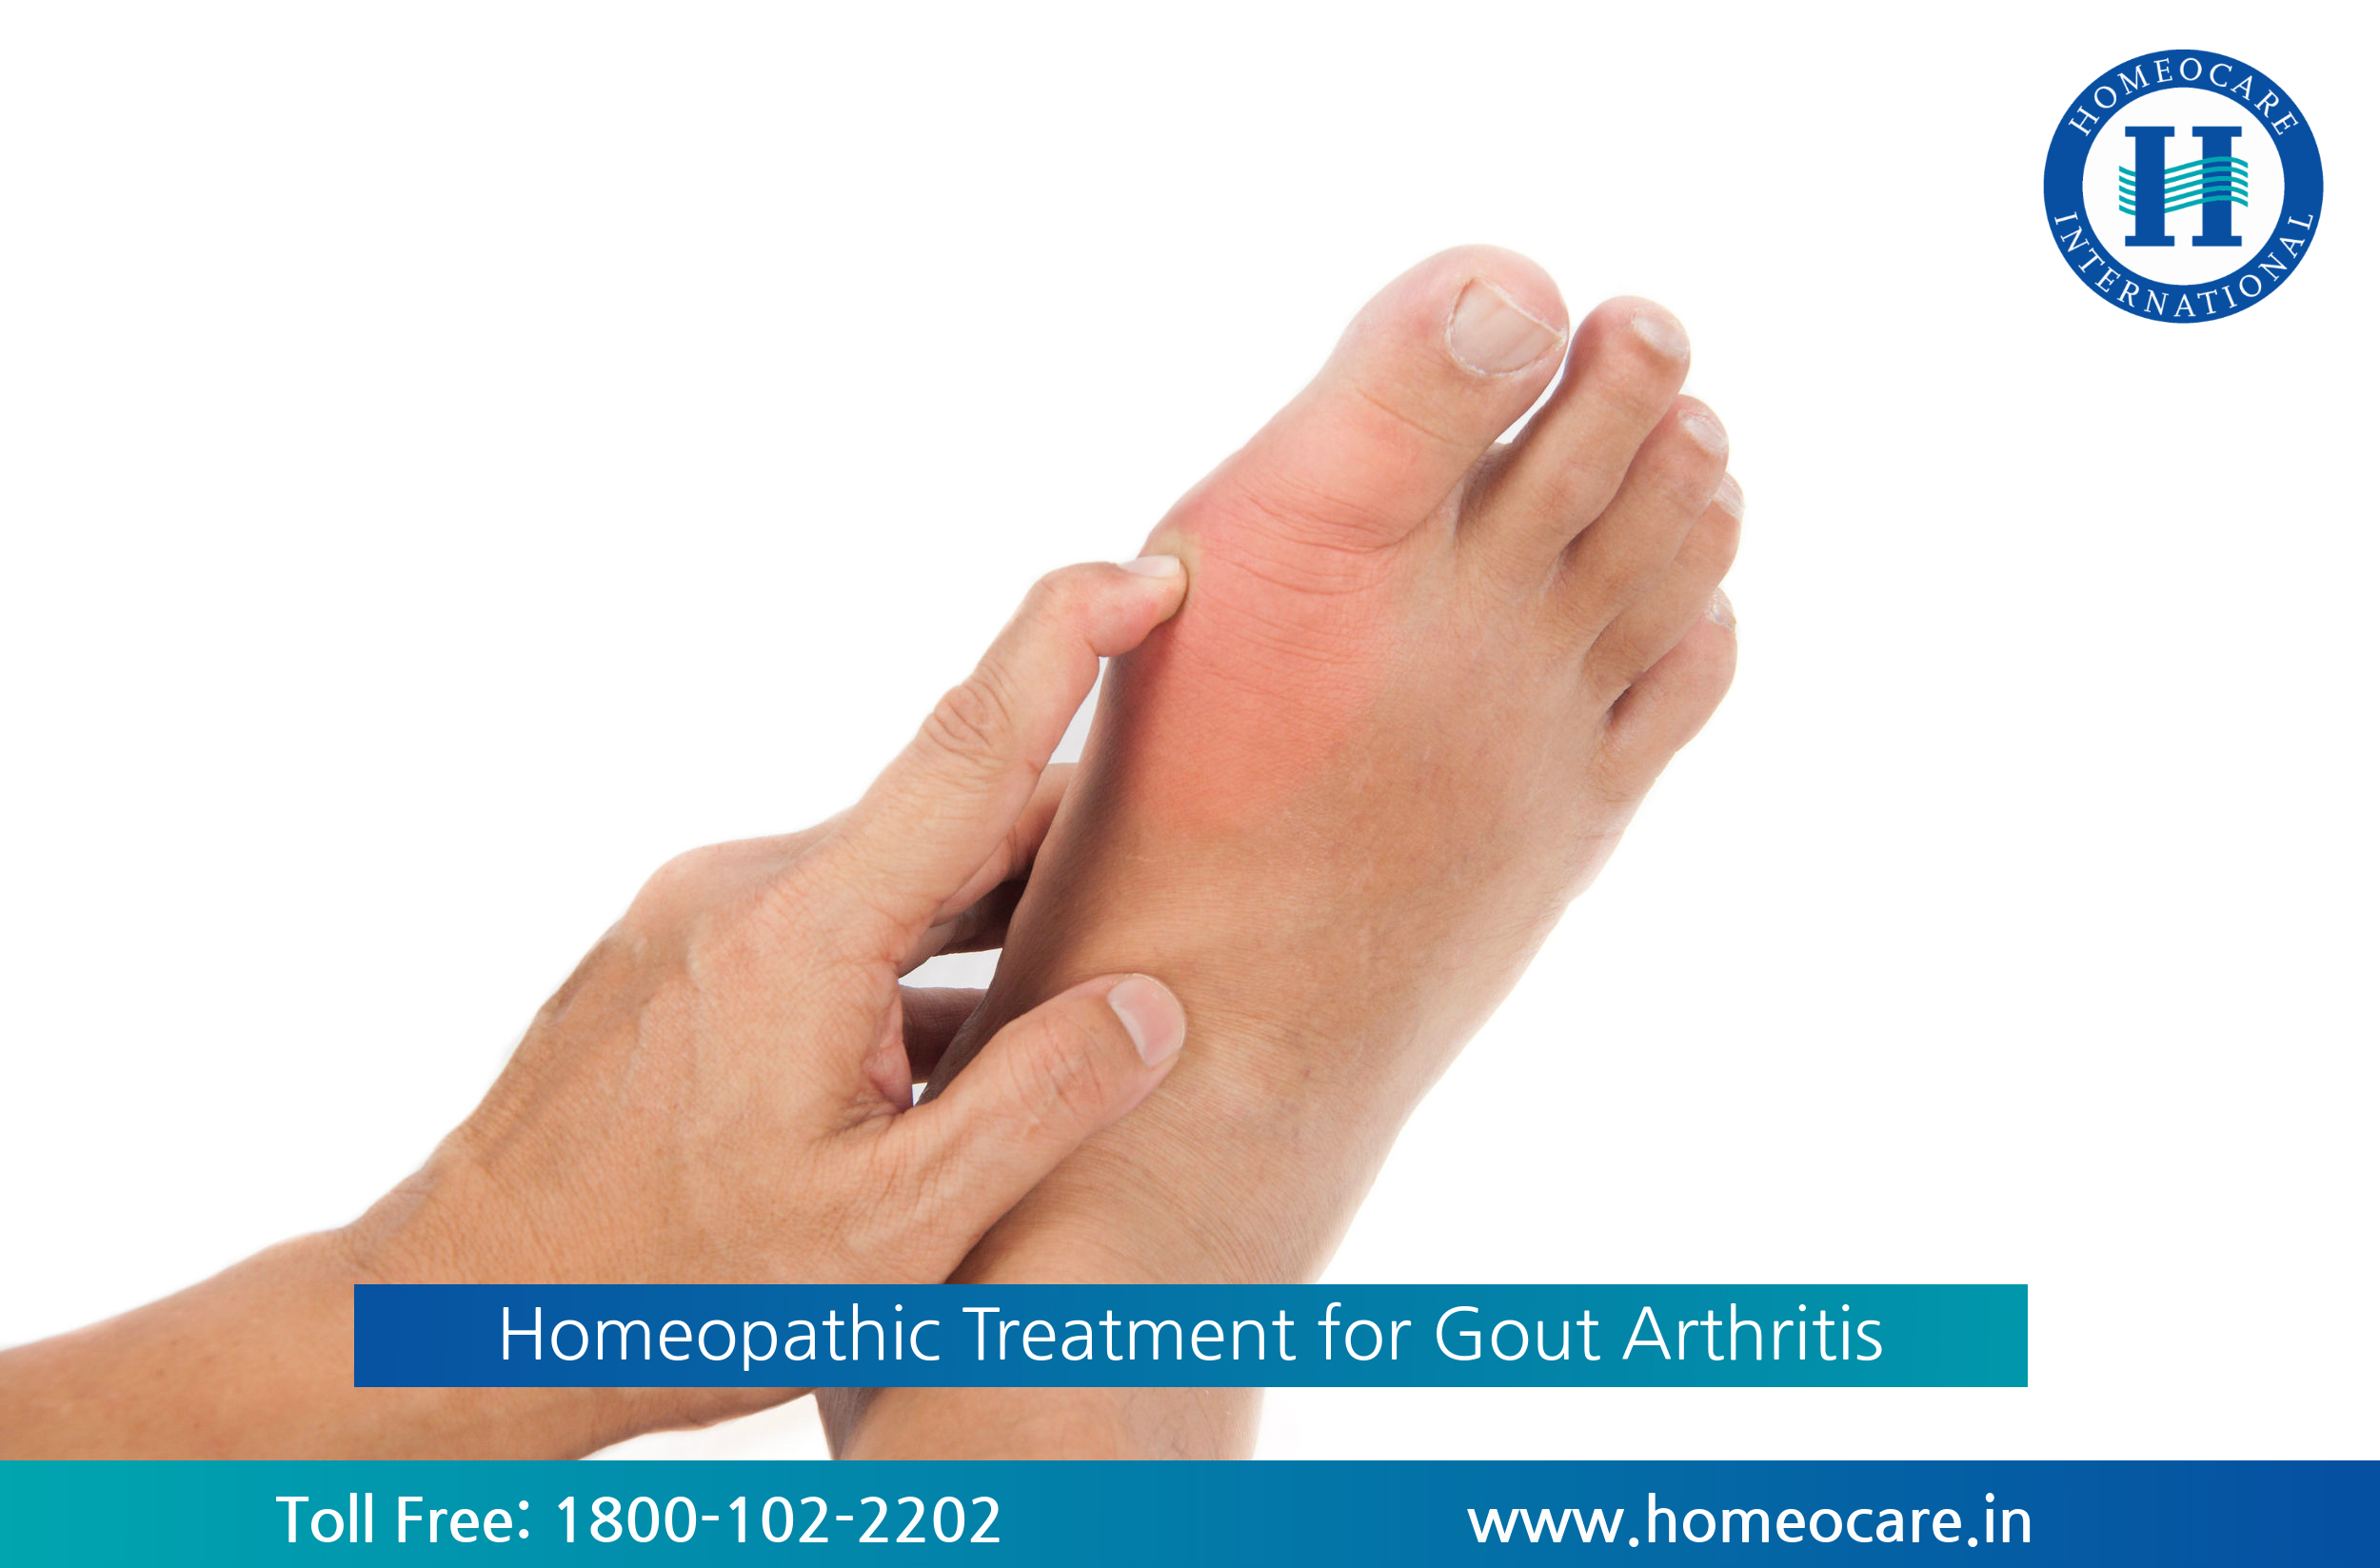 Homeopathic Treatment for Gout Arthritis